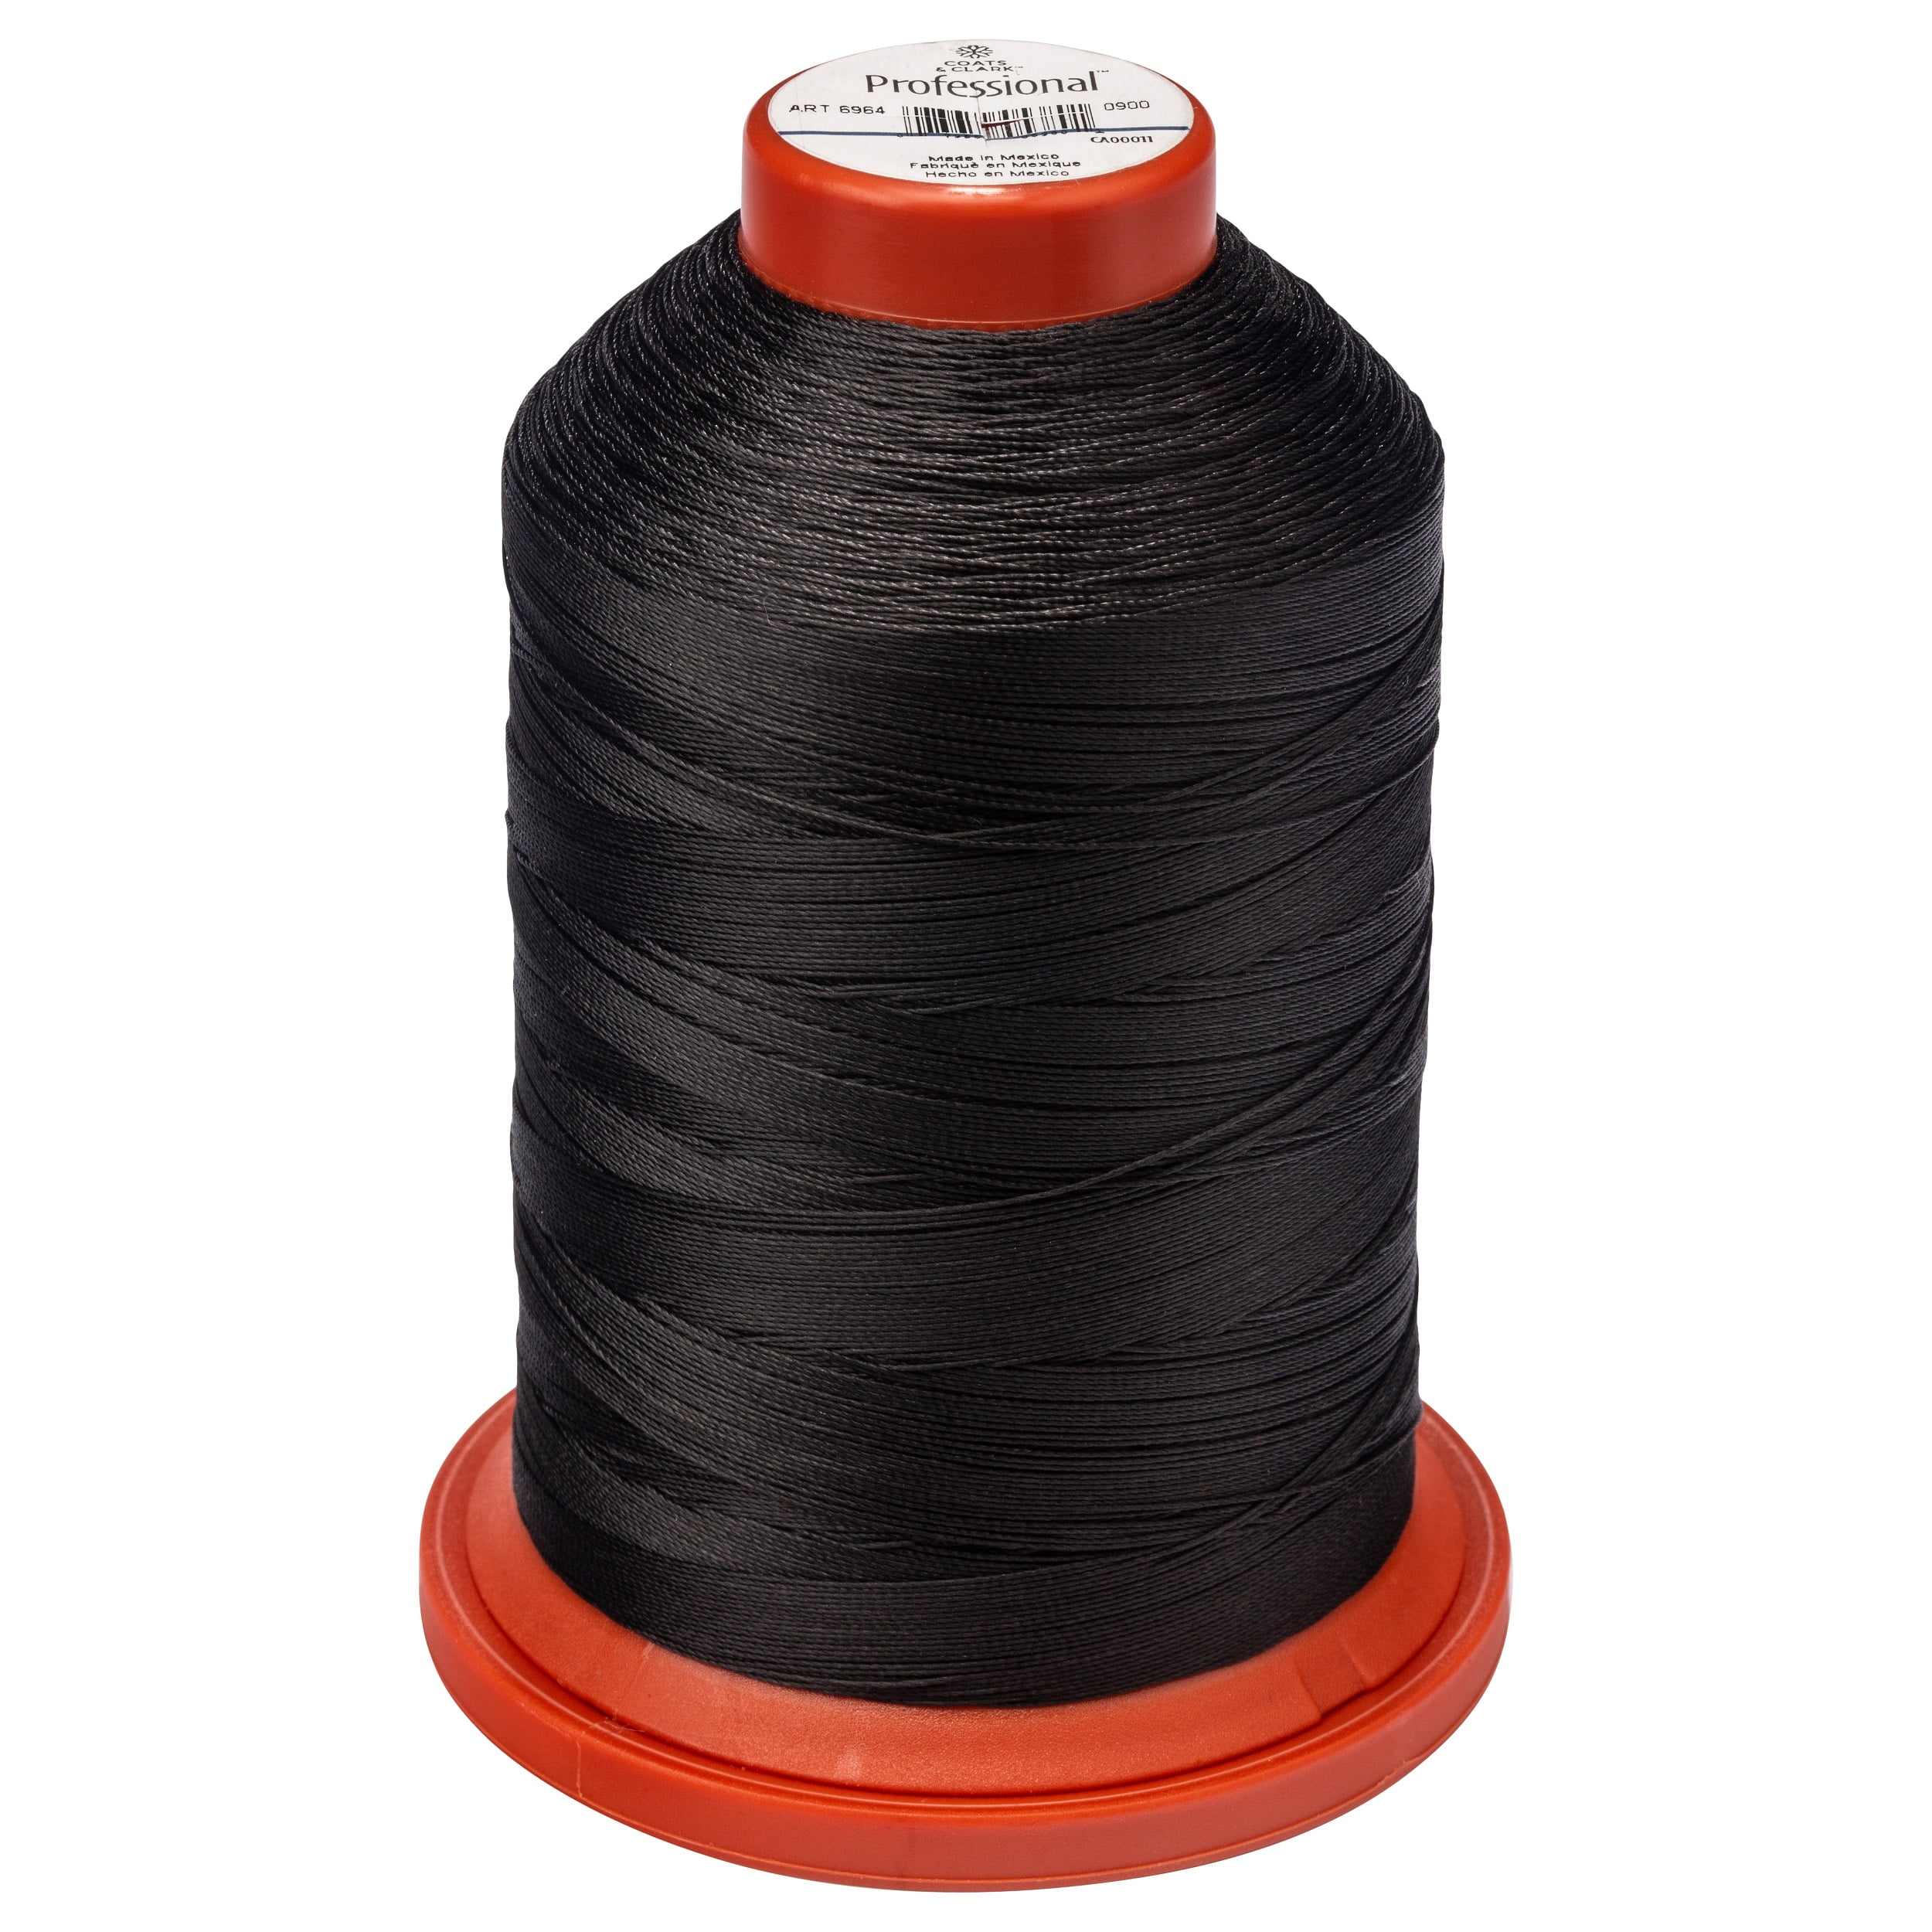 Sew-Ology 100% Bonded Nylon Extra Strong Upholstery Thread 1250 yds/137m  Seaweed #1341 - 1254333